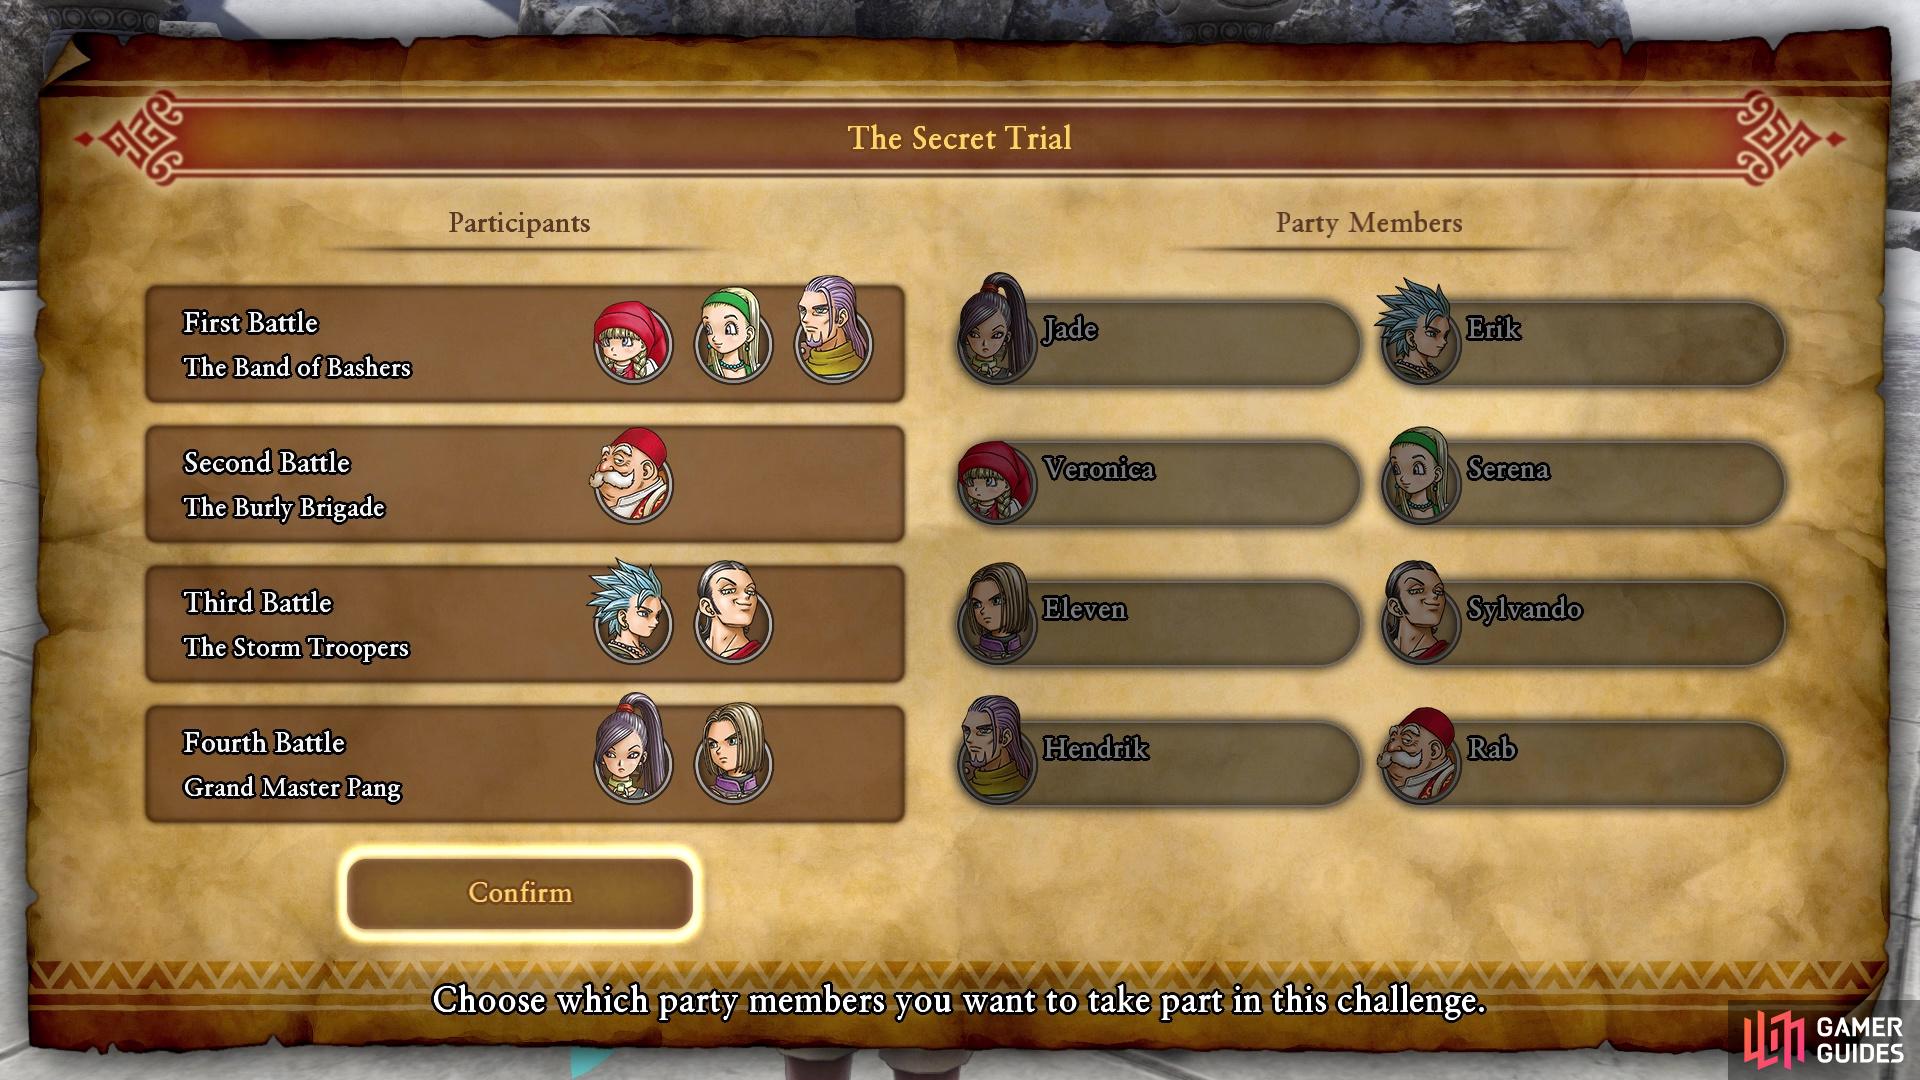 Your lineup for the Secret Trial